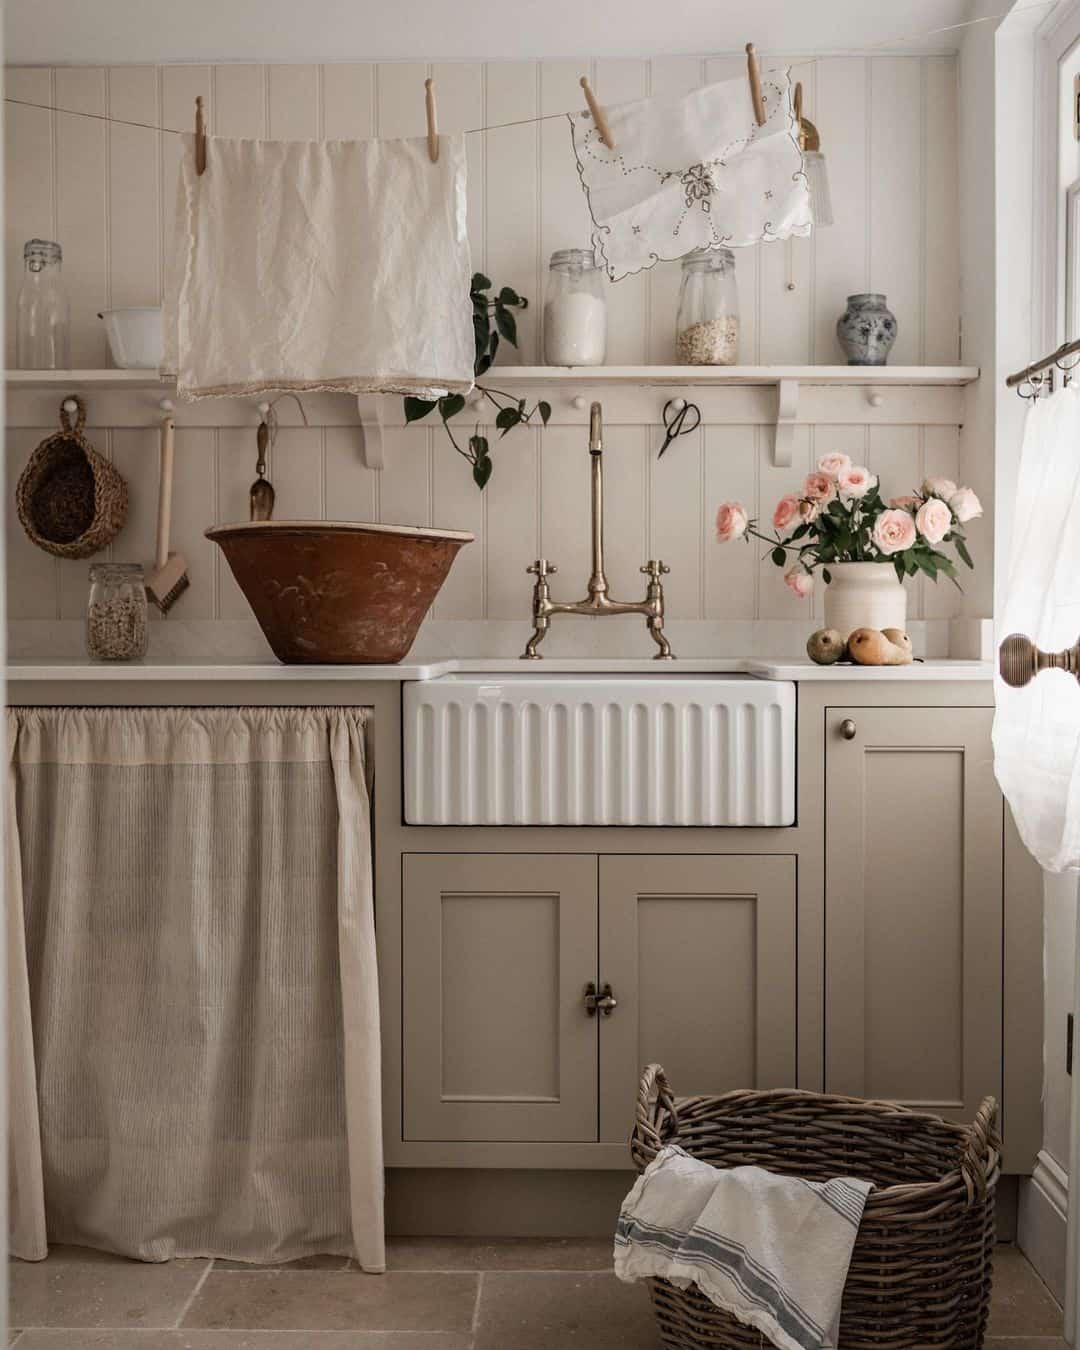 Dainty Details Enhanced With French Country Influences - Soul & Lane